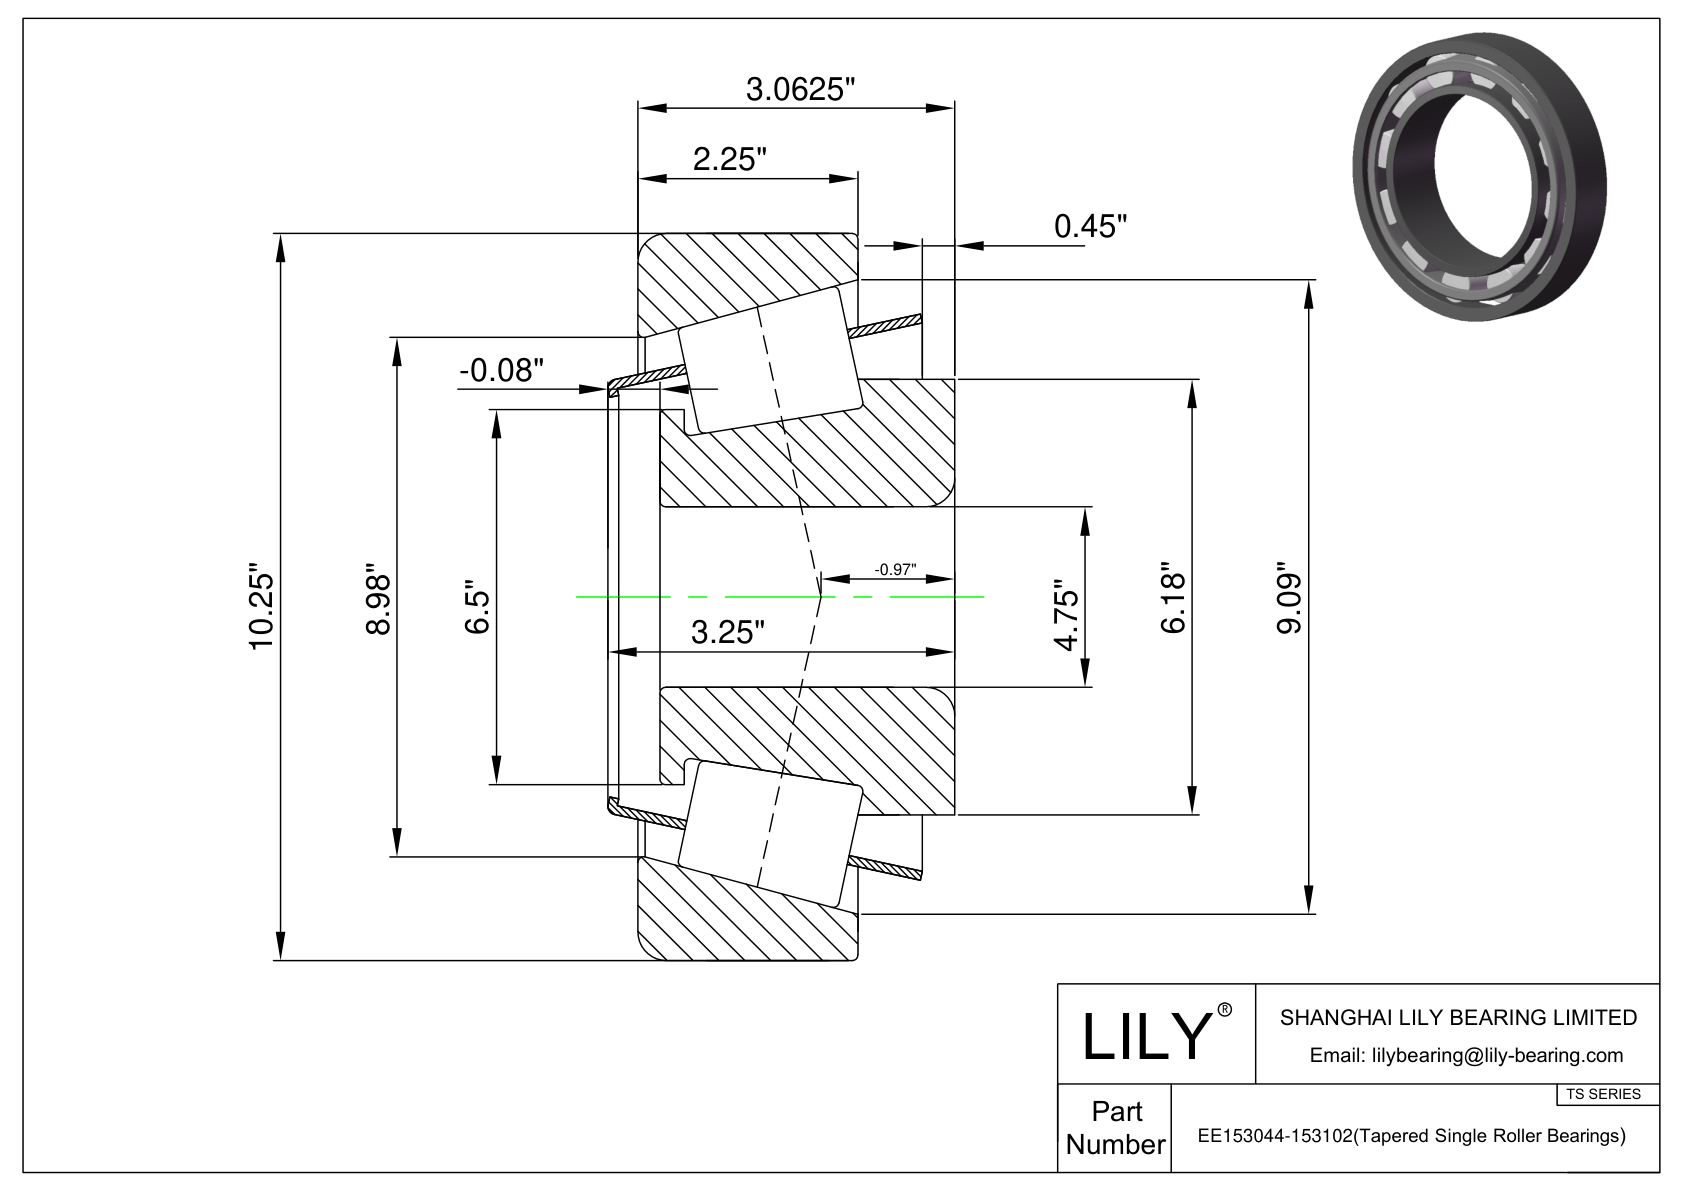 EE153044-153102 TS (Tapered Single Roller Bearings) (Imperial) cad drawing